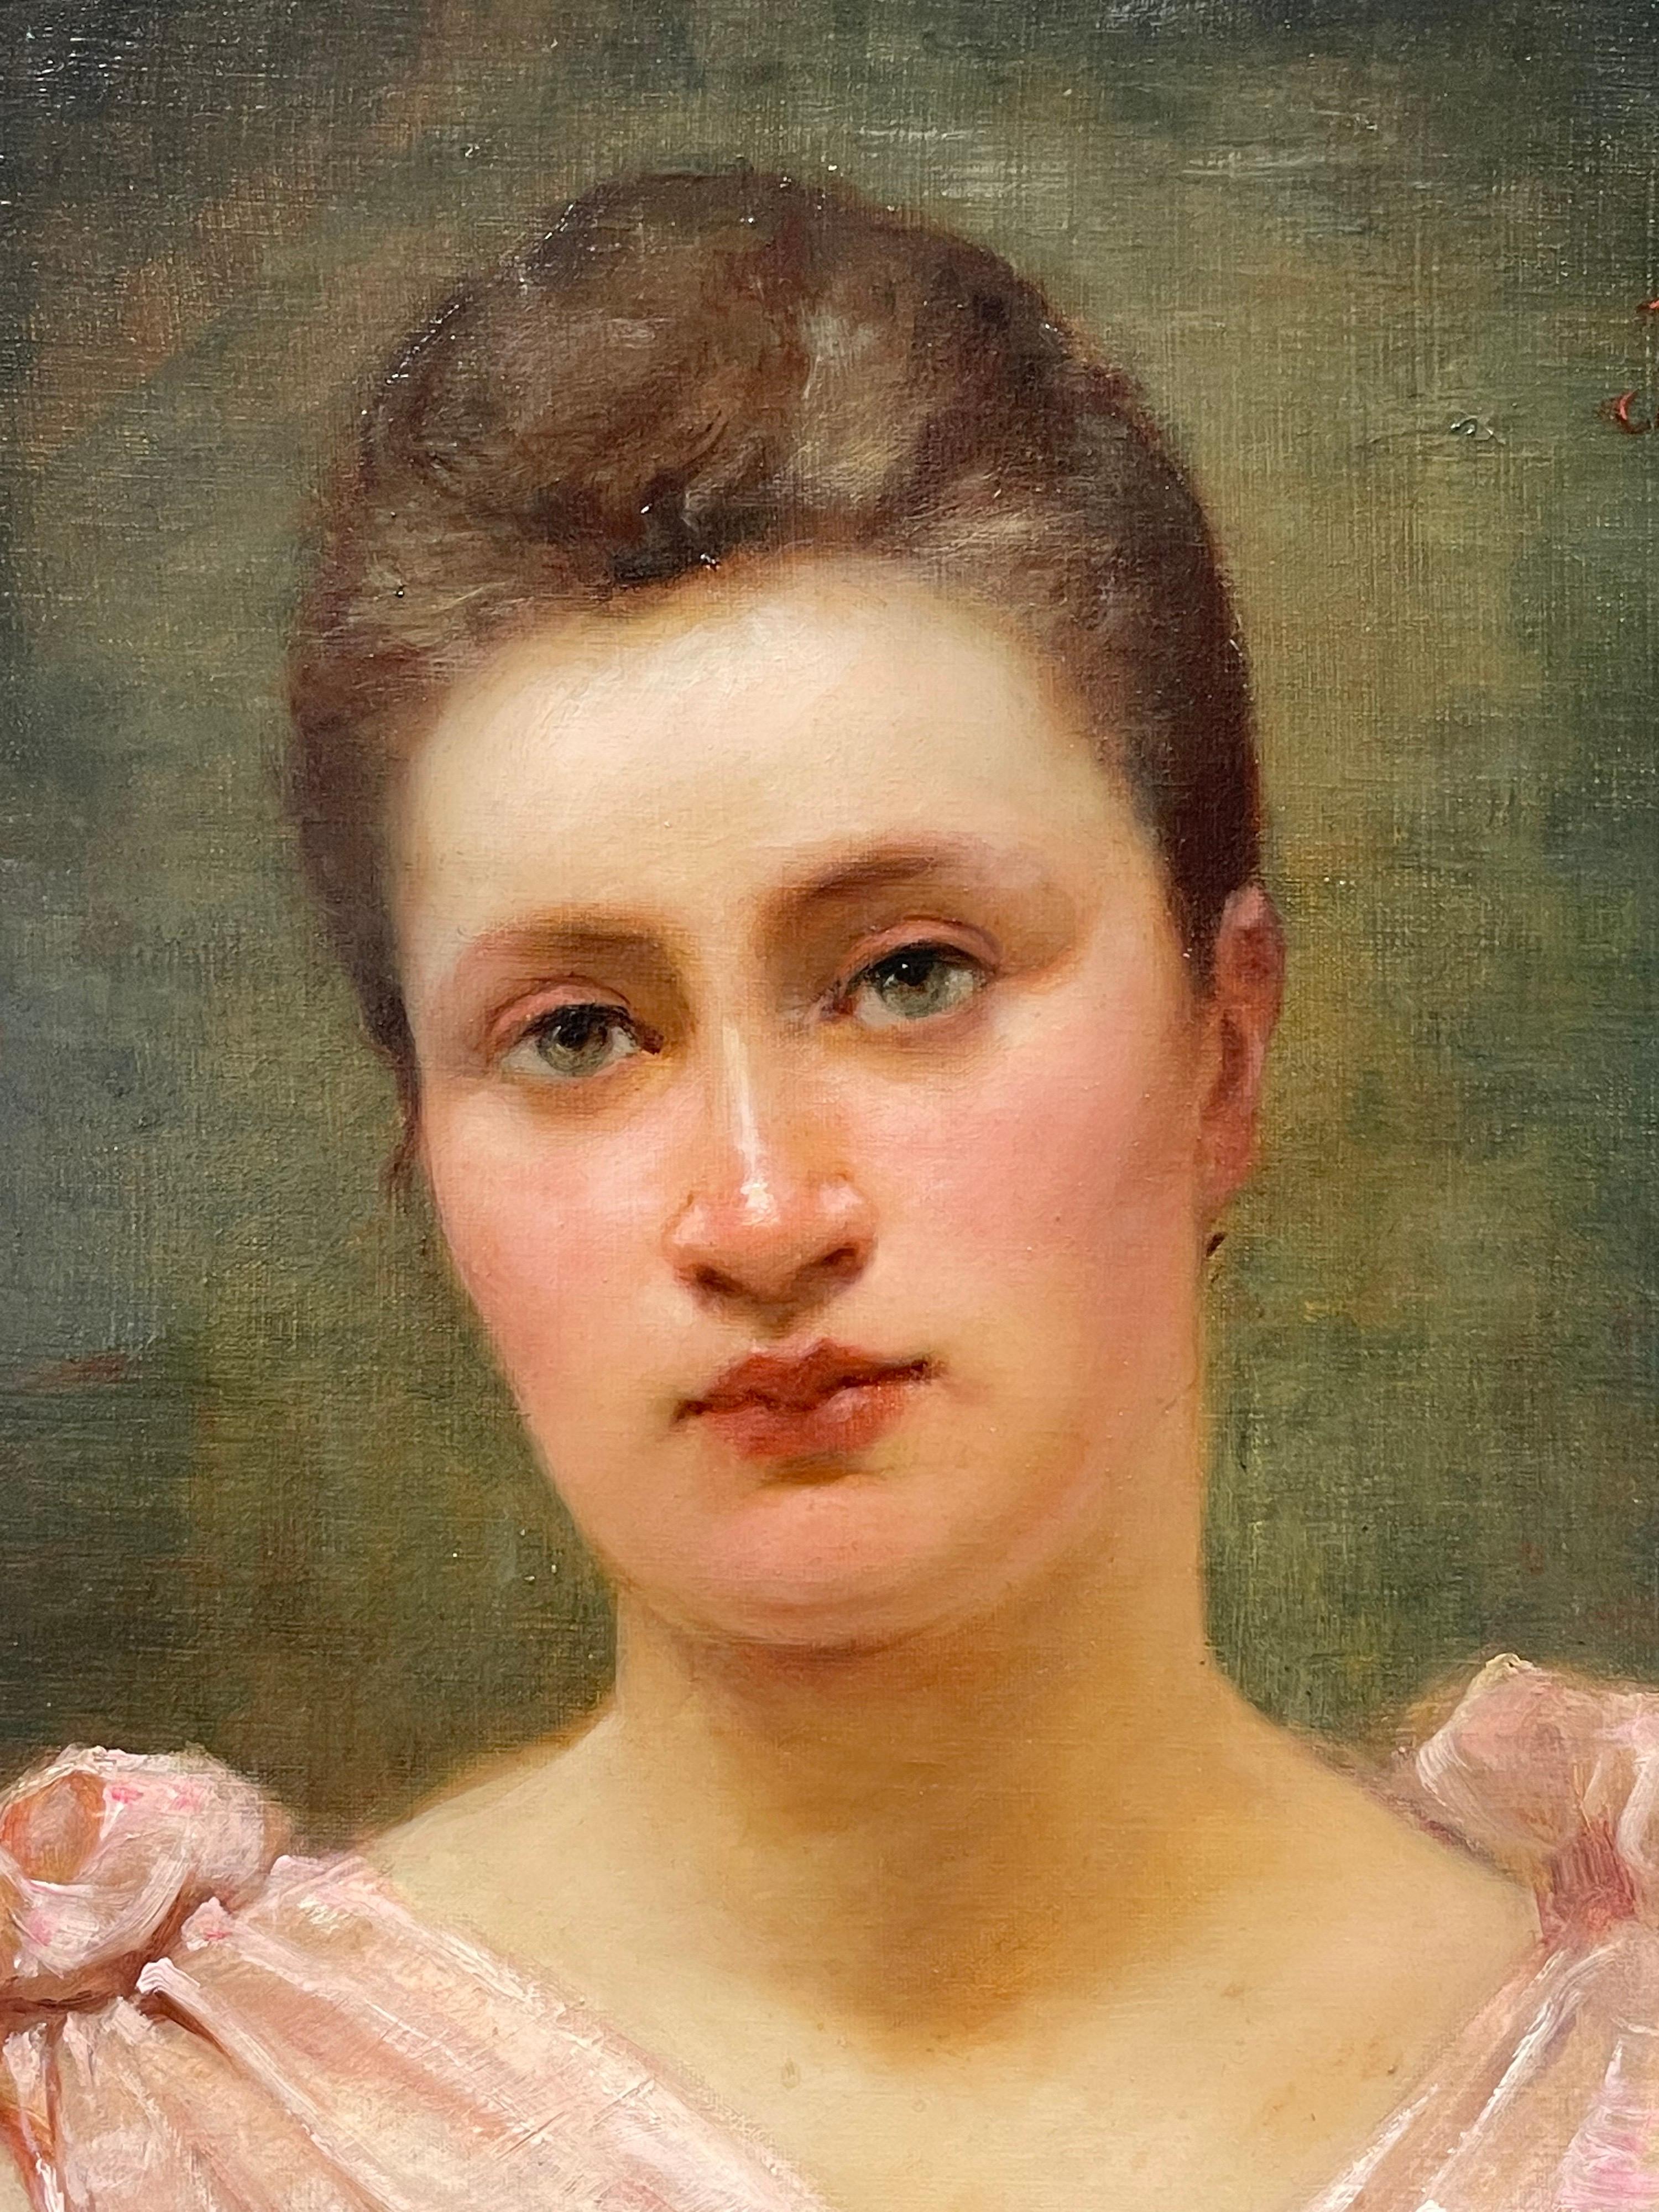 Portrait of a Lady in Pink
French School, indistinctly signed upper right corner
dated 1893
oil painting on canvas, unframed
canvas: 24 x 19.75 inches

condition: very good, a few light age related scuffs around the edges which would cover with a